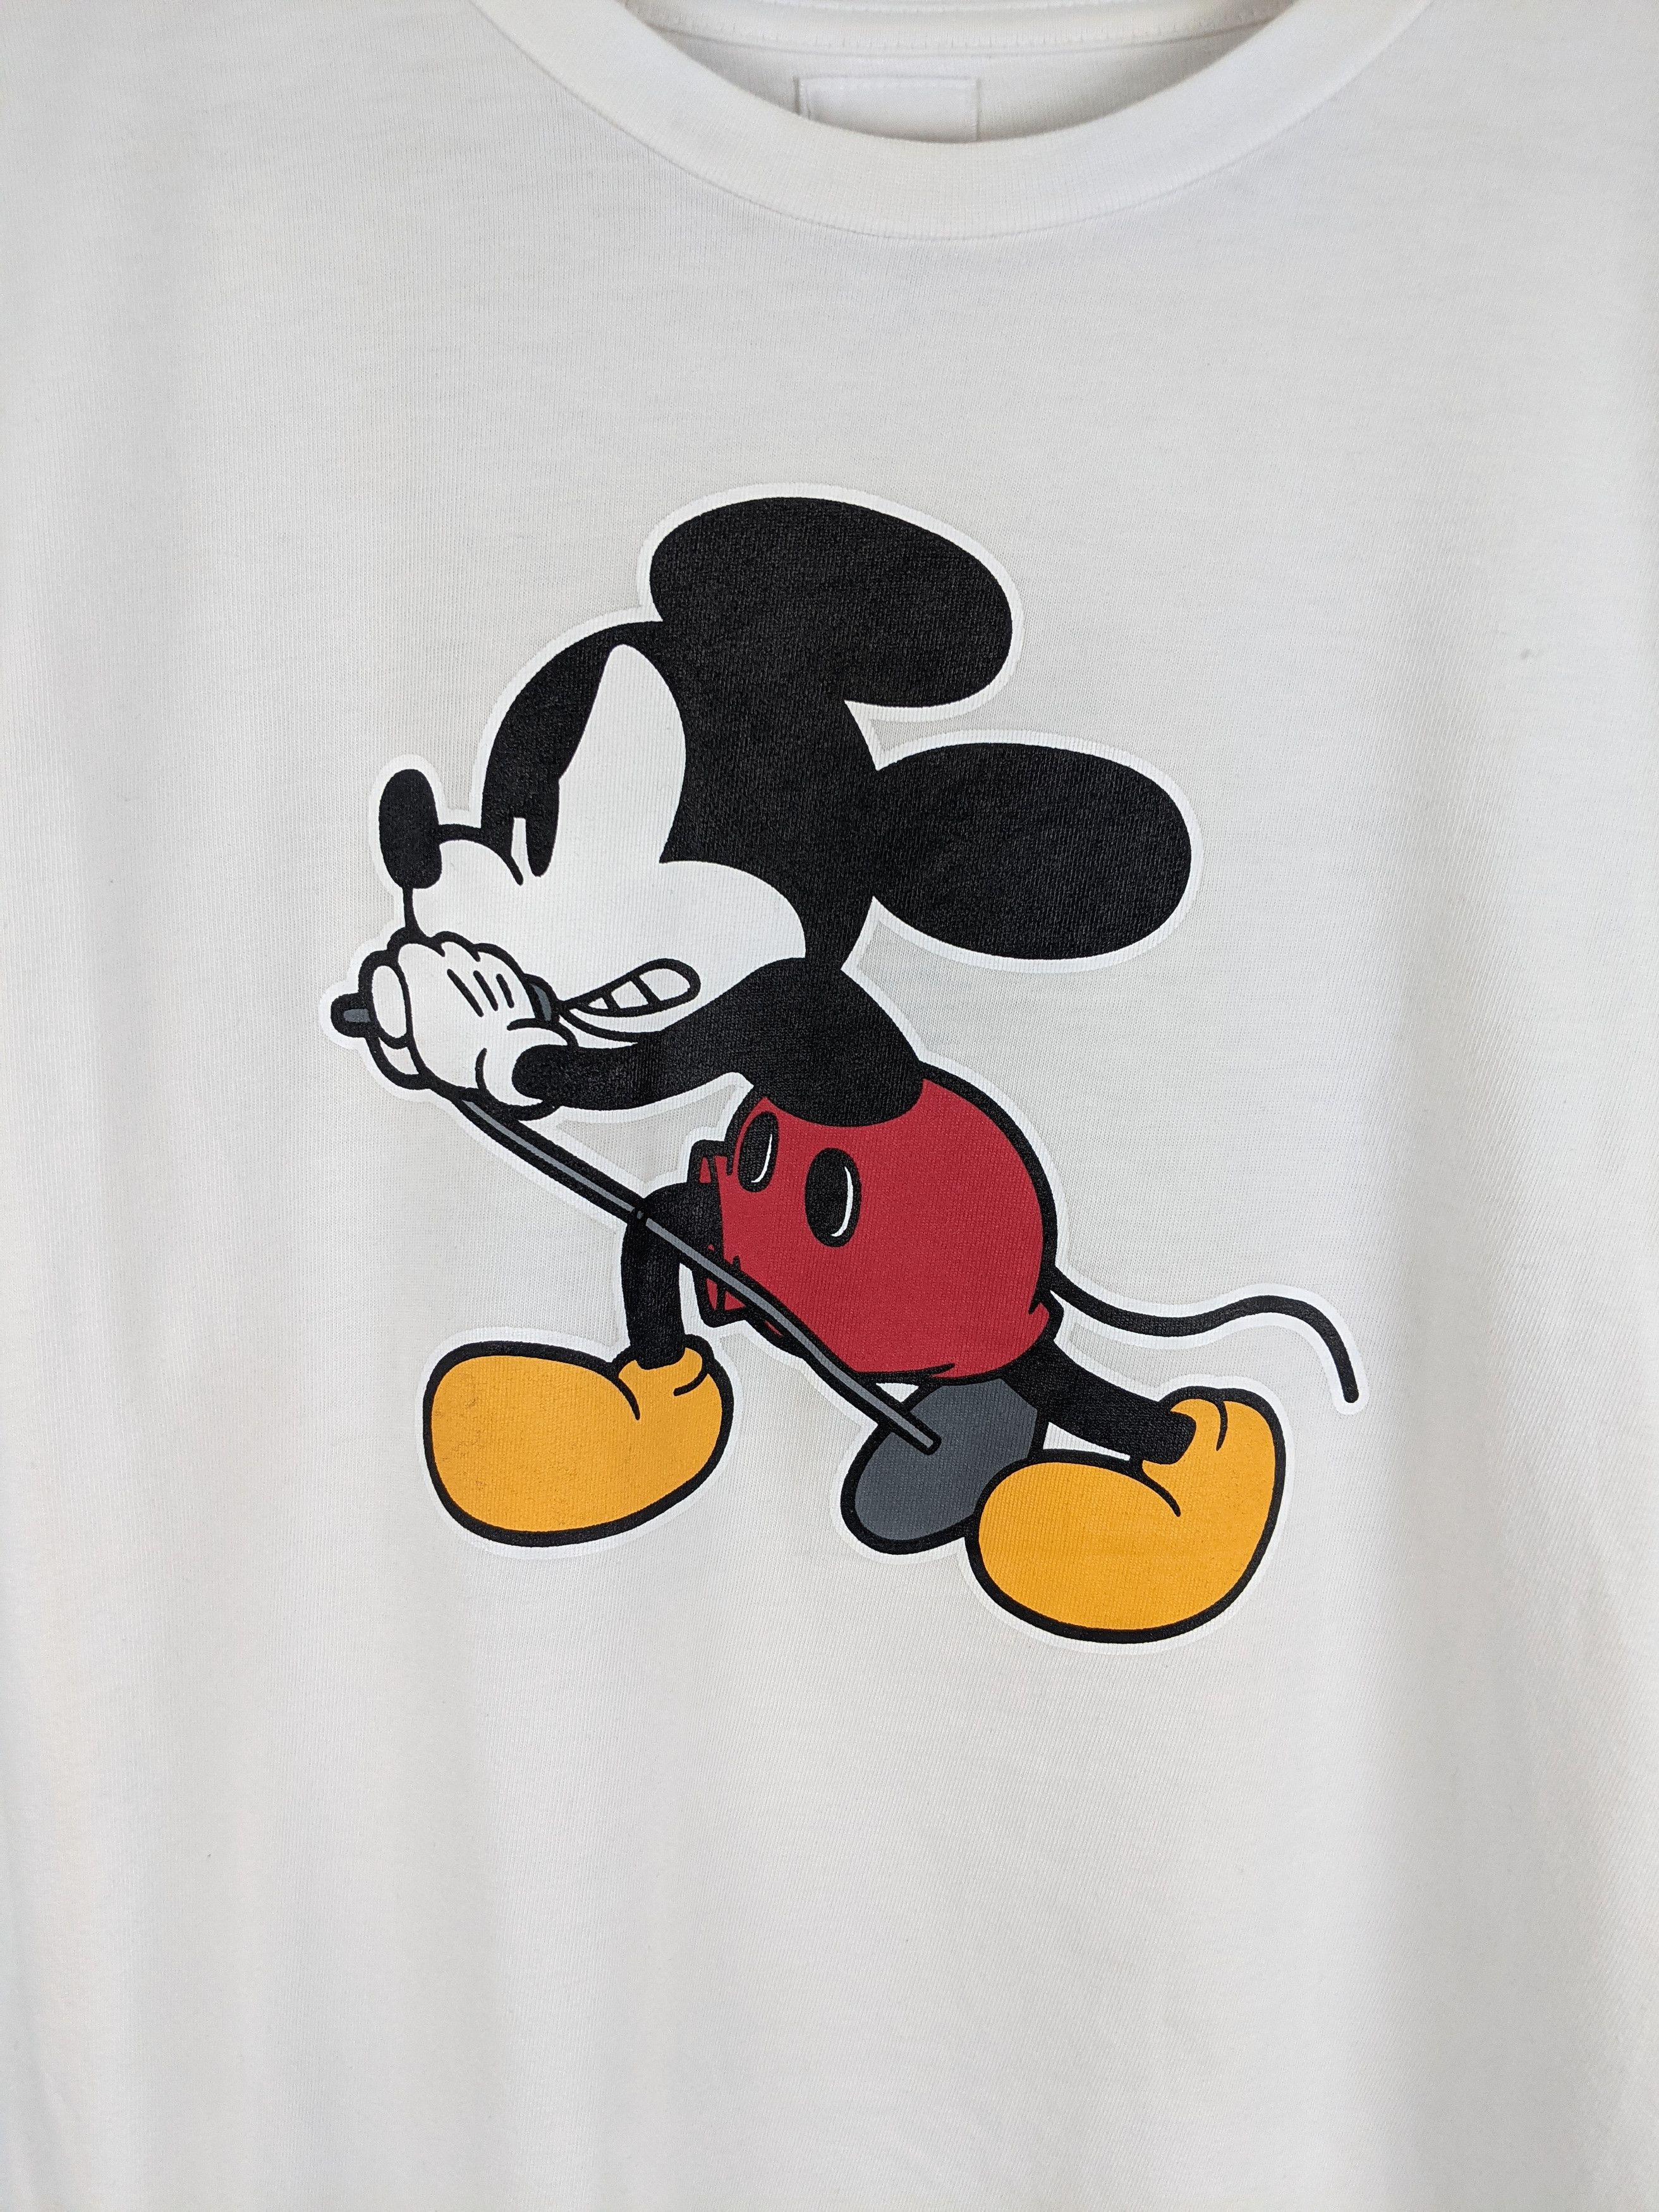 Numbernine x Mickey Mouse shirt - 3